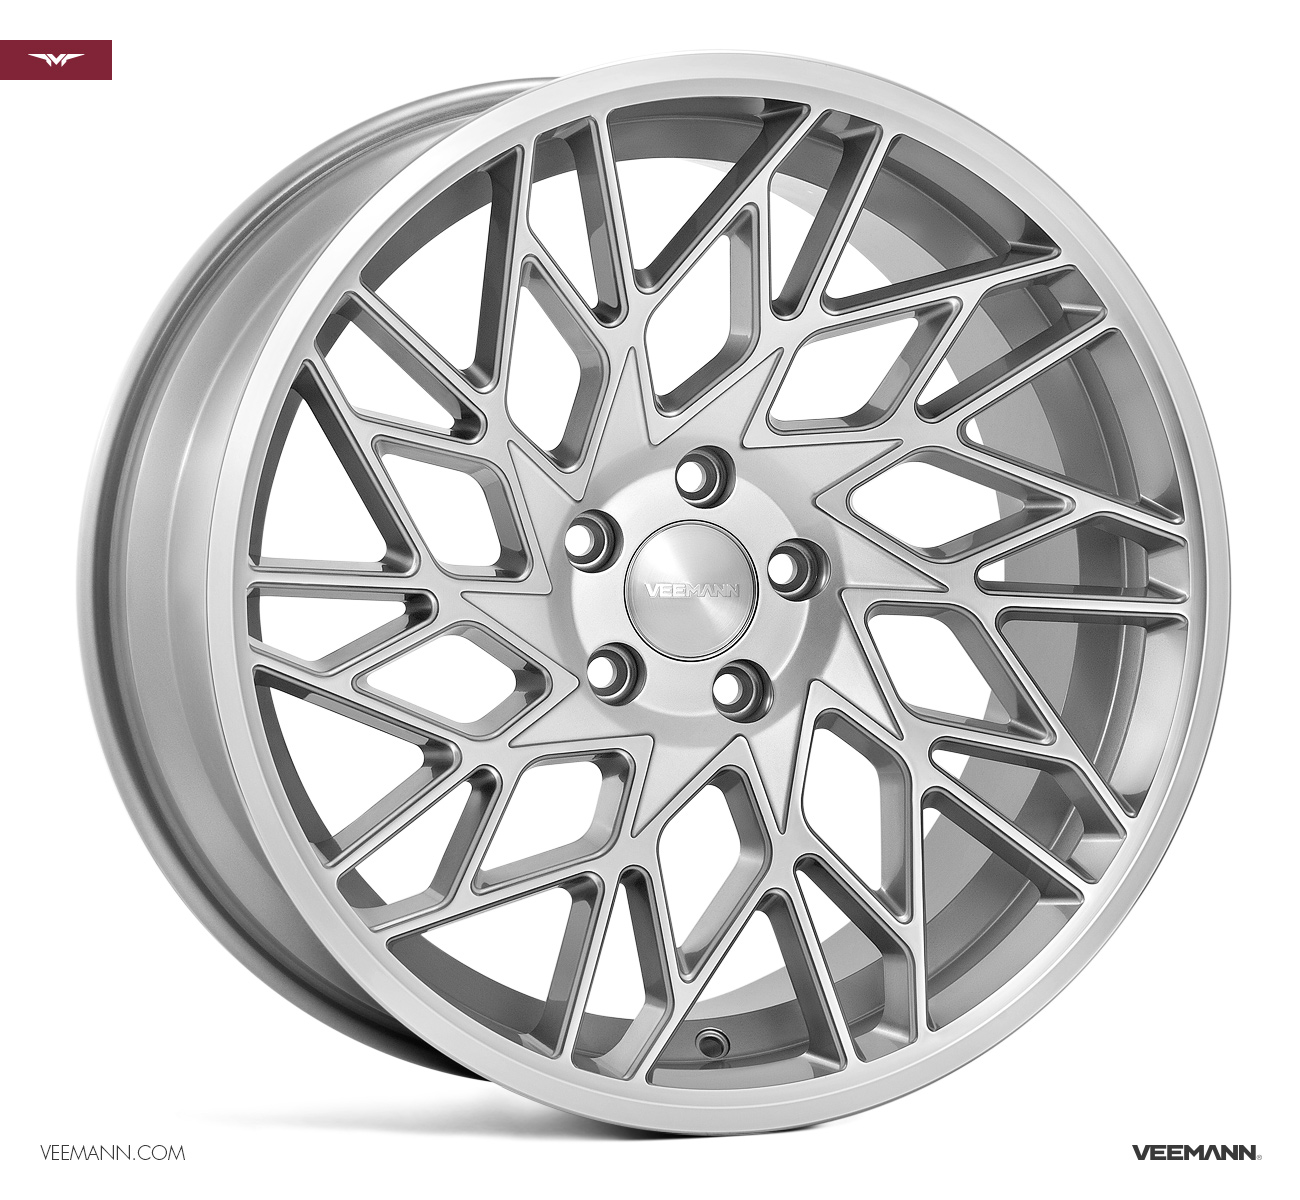 NEW 19" VEEMANN V-FS29R ALLOYS IN SILVER POL WITH WIDER 9.5" REARS